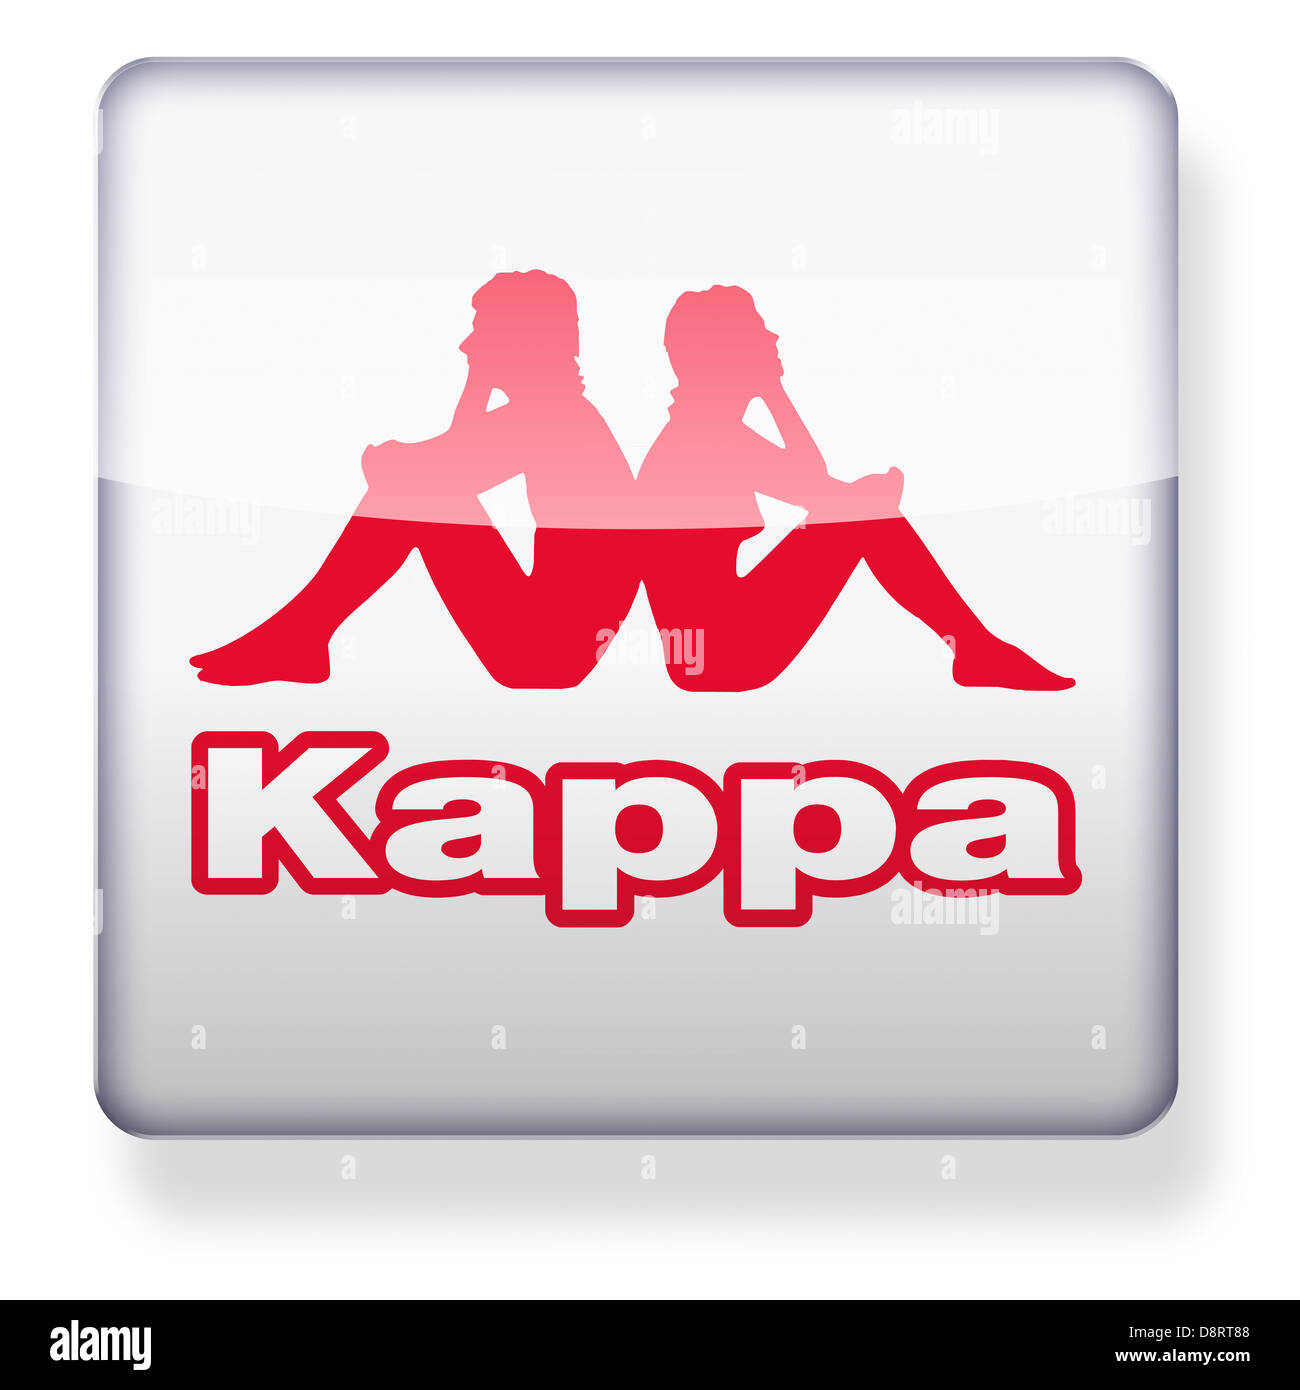 Kappa logo as an app icon. Clipping path included Stock Photo - Alamy